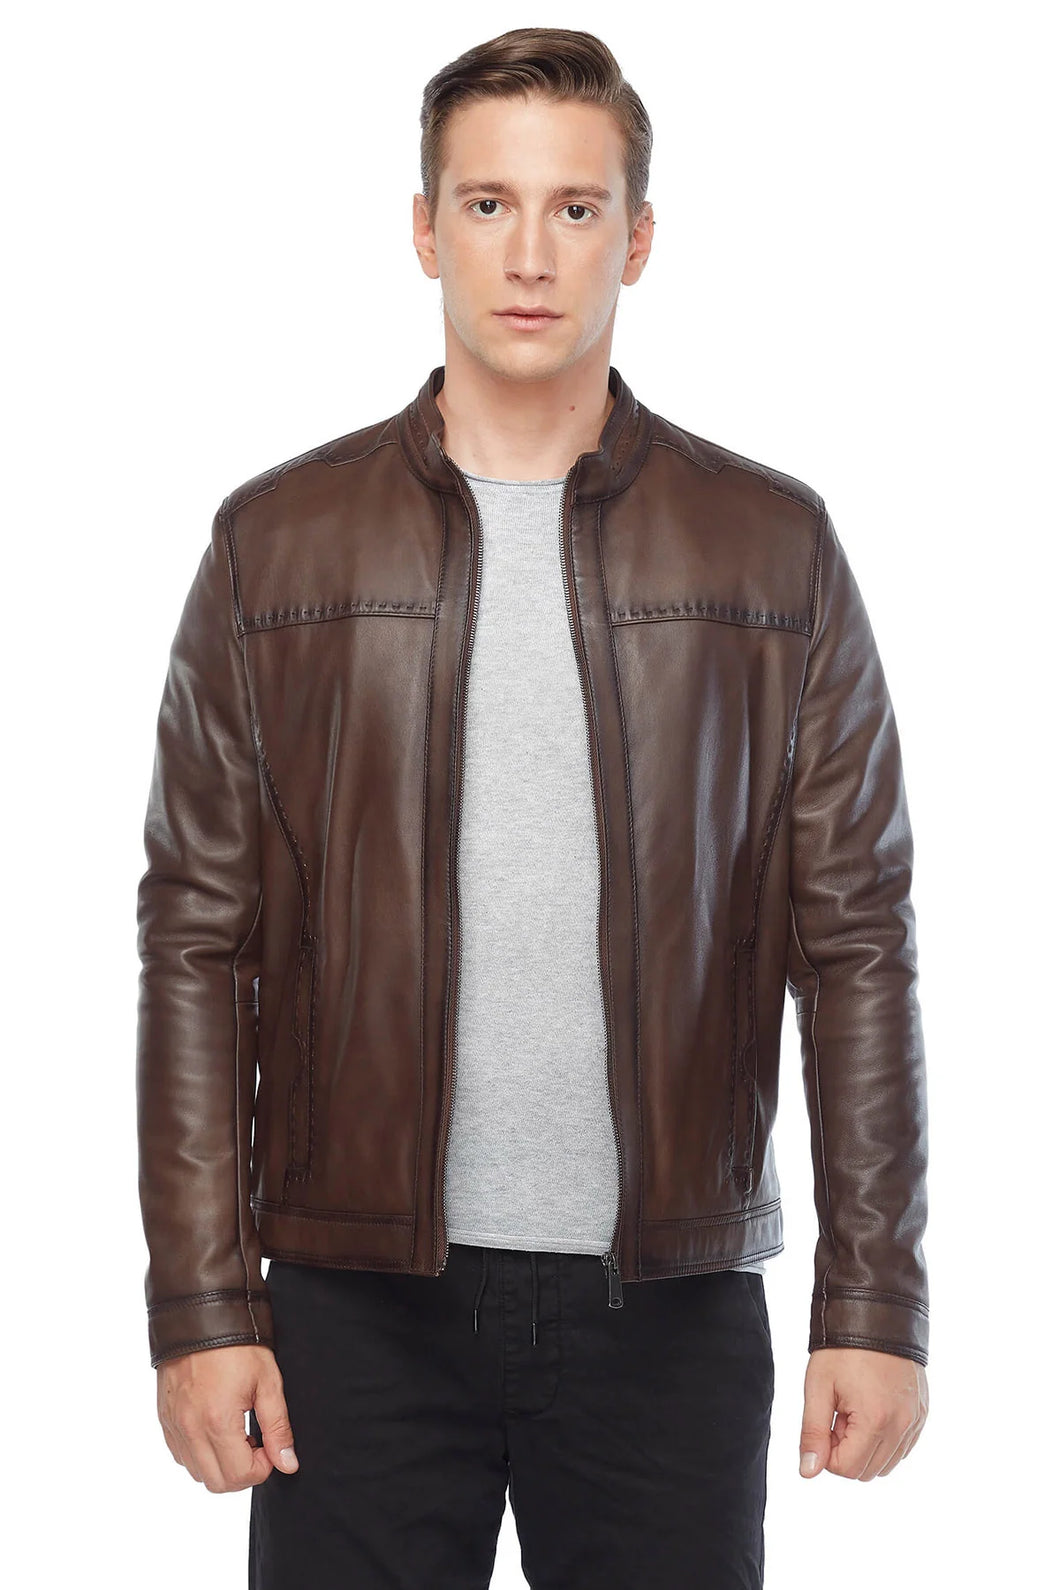 Sport Stitched Classic Leather Brown Jacket